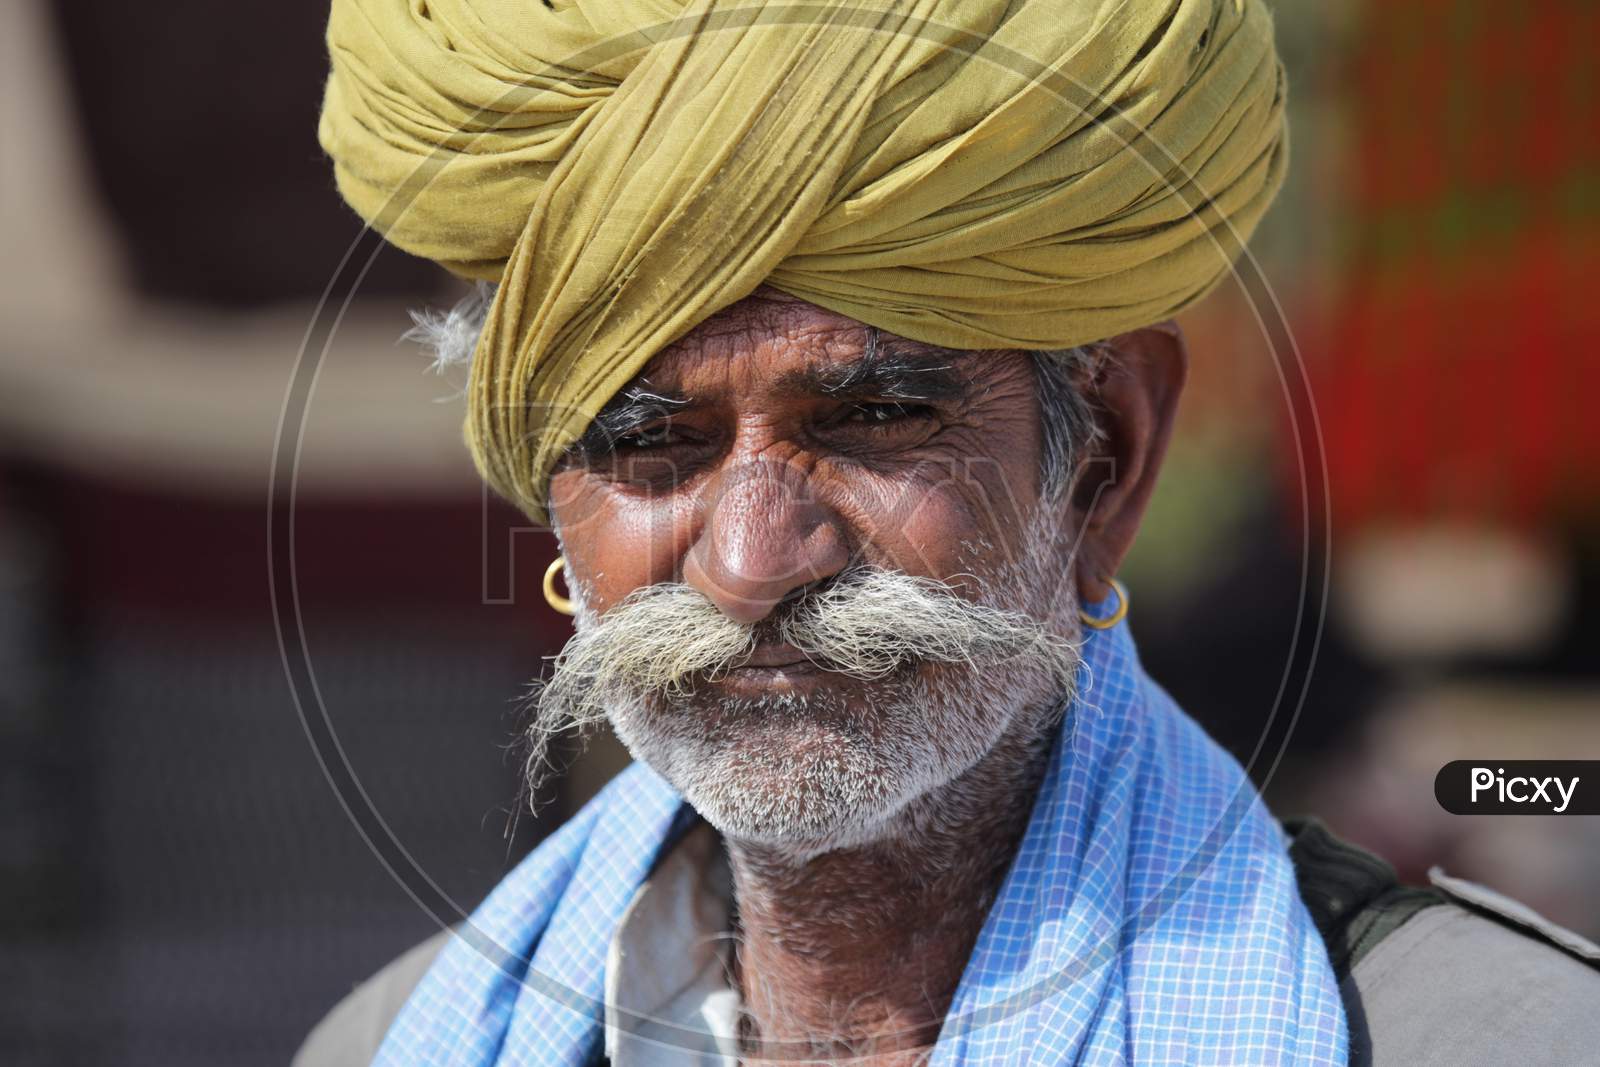 Portrait of Rajasthani Old Man with Turban